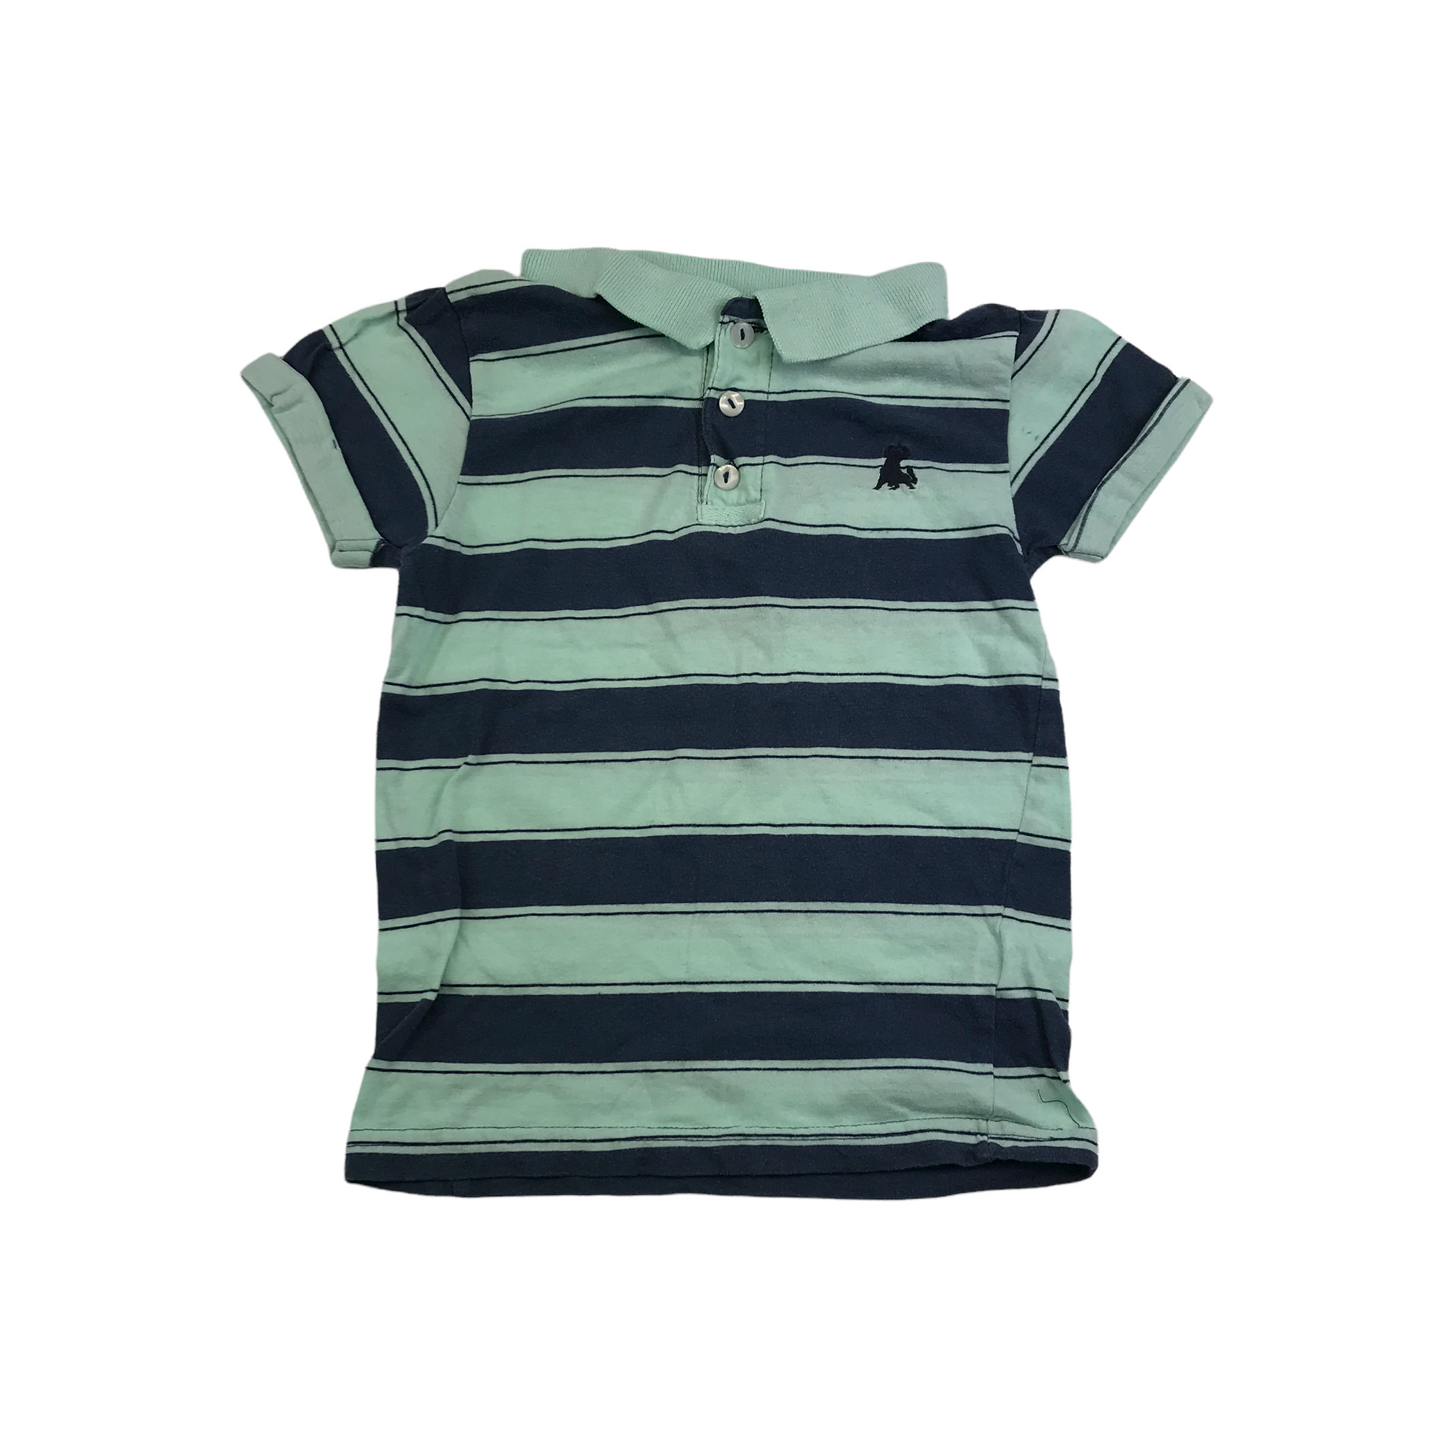 Primark Navy and Mint Stripy Polo Shirt Age 4